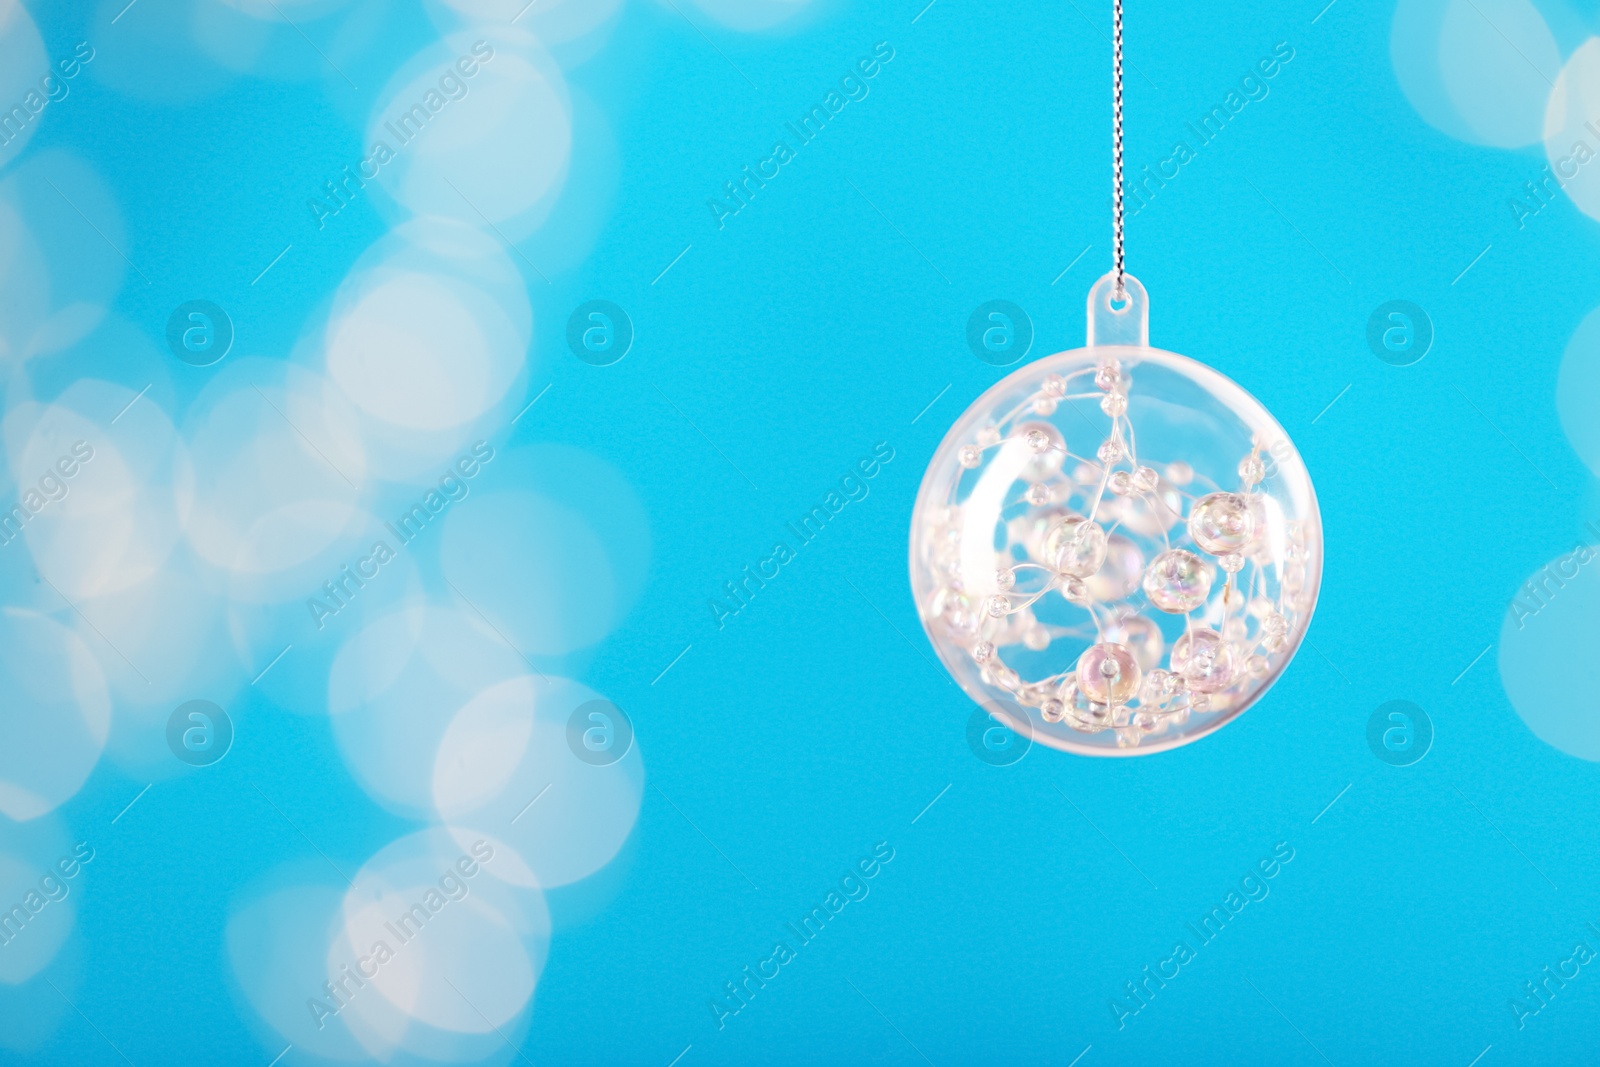 Photo of Decorative snow globe hanging on against blurred festive lights, space for text